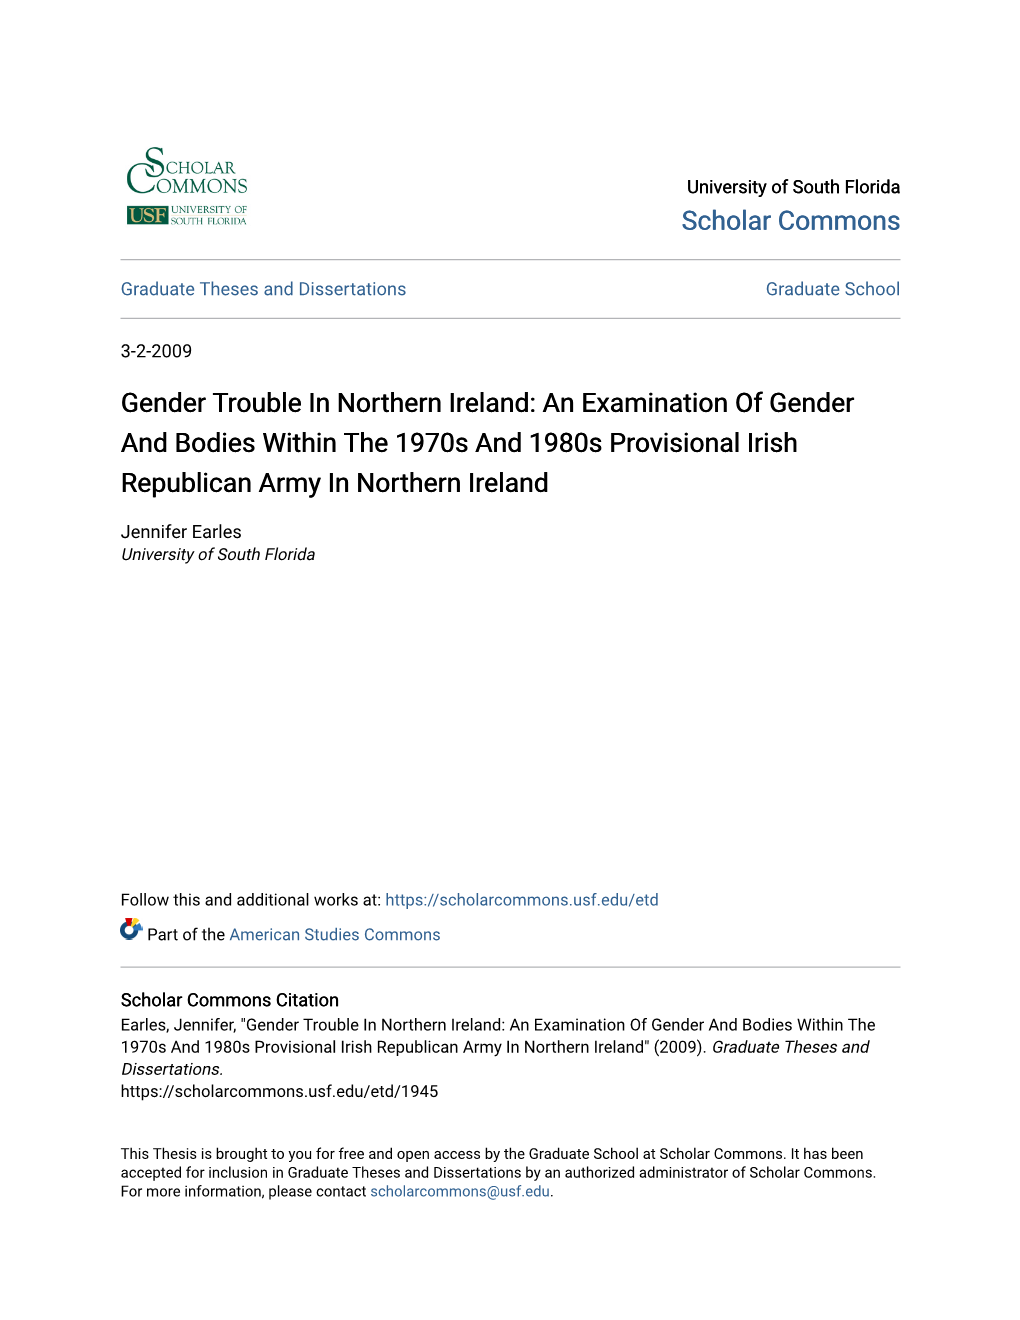 Gender Trouble in Northern Ireland: an Examination of Gender and Bodies Within the 1970S and 1980S Provisional Irish Republican Army in Northern Ireland